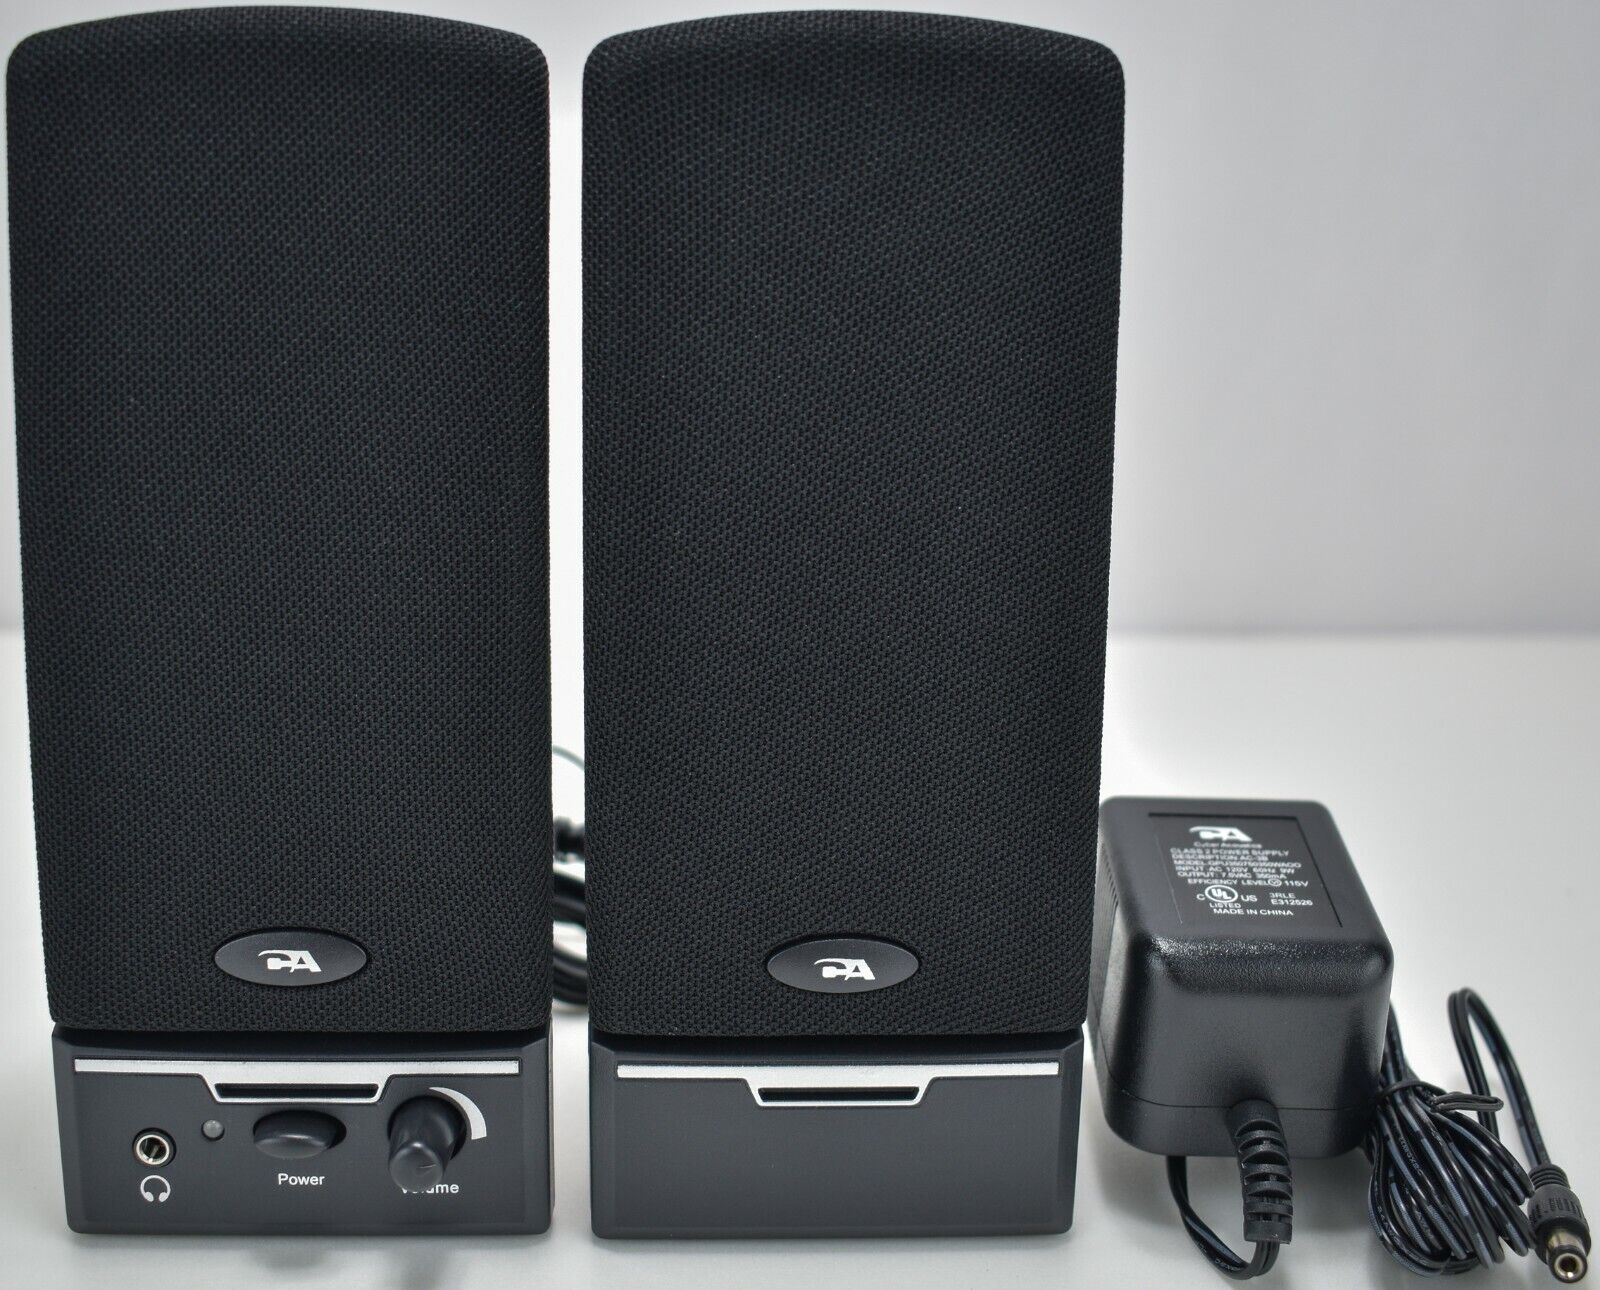 Cyber Acoustics CA-2014 Powered Speaker System